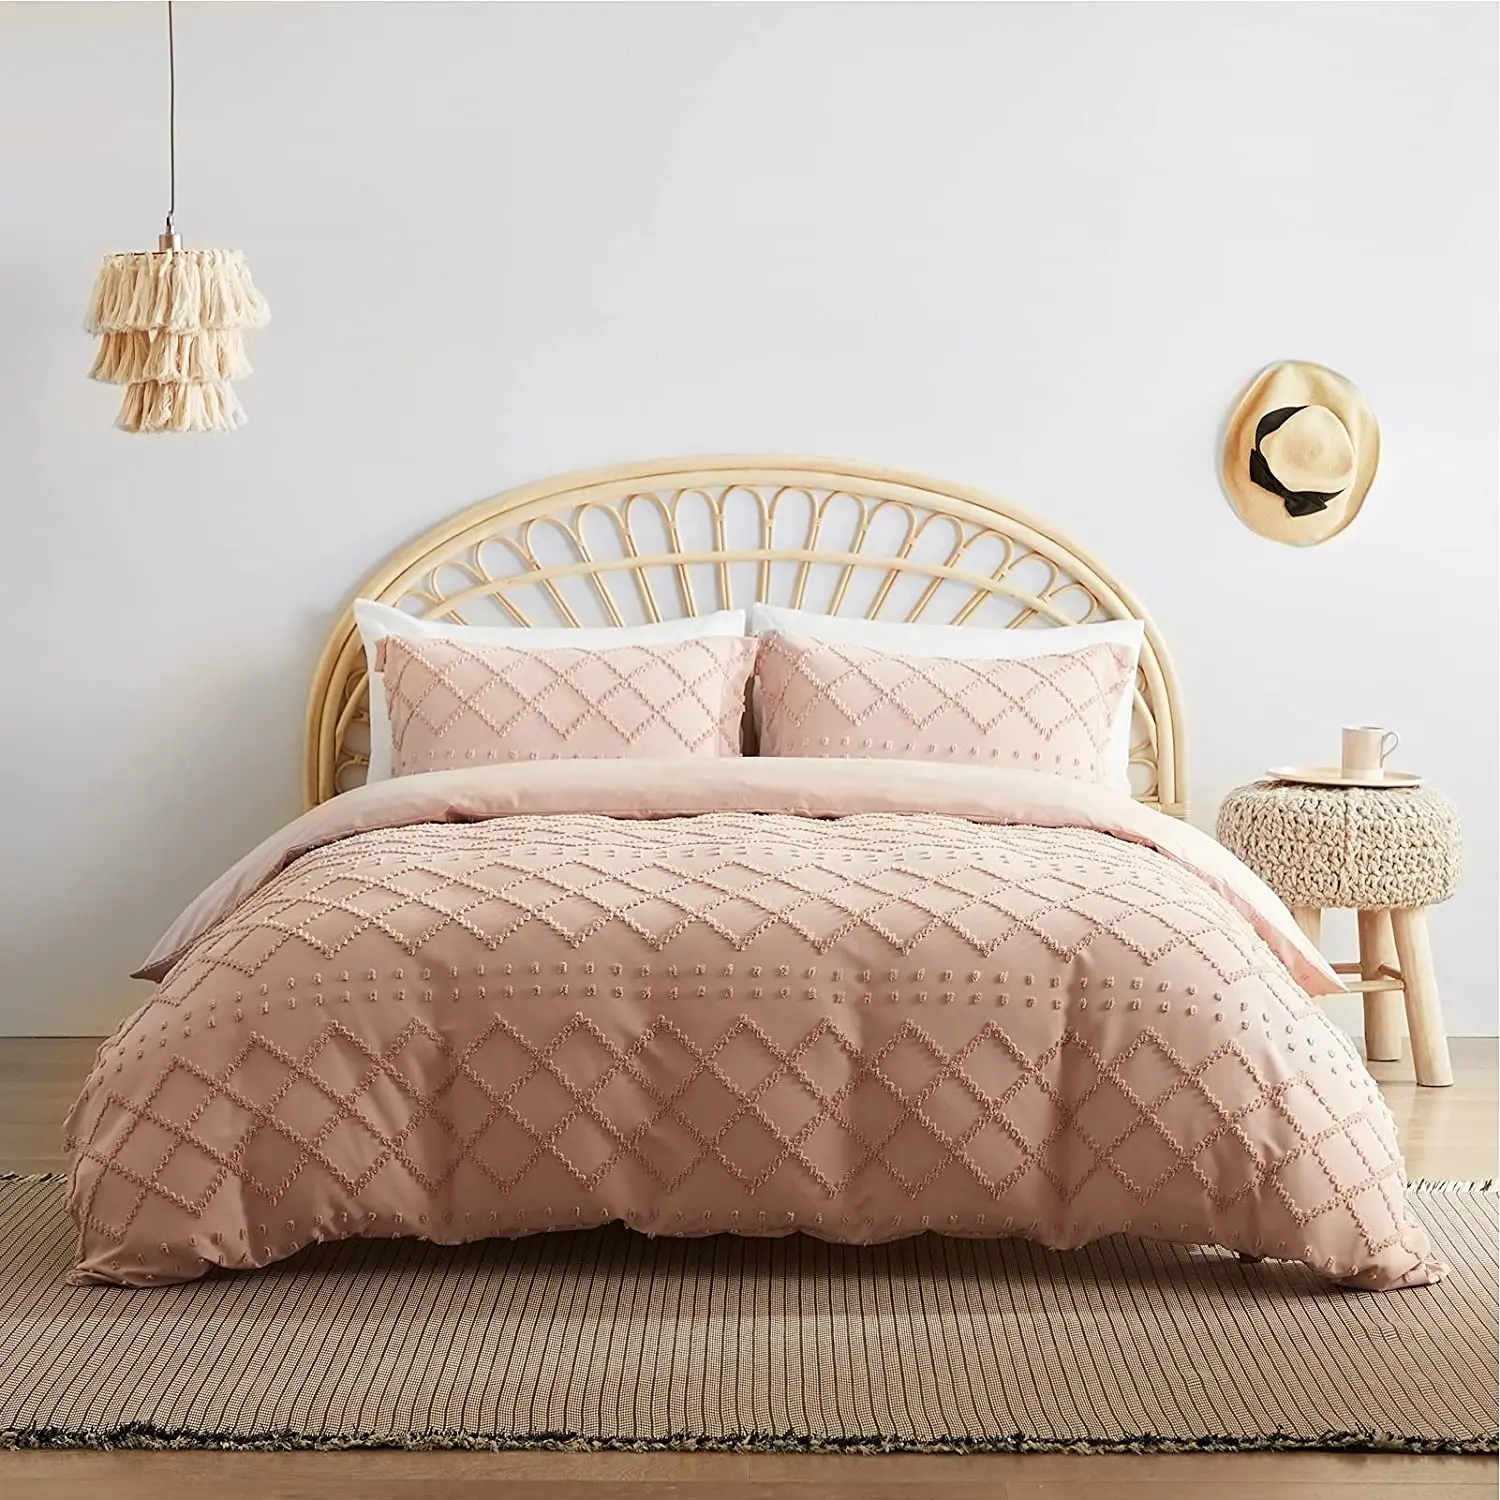 Tufted Duvet Cover Set - 3 Pieces Embroidery Shabby Chic Boho Duvet Cover for All Seasons King Coral Pink 104x90''NO Comforter